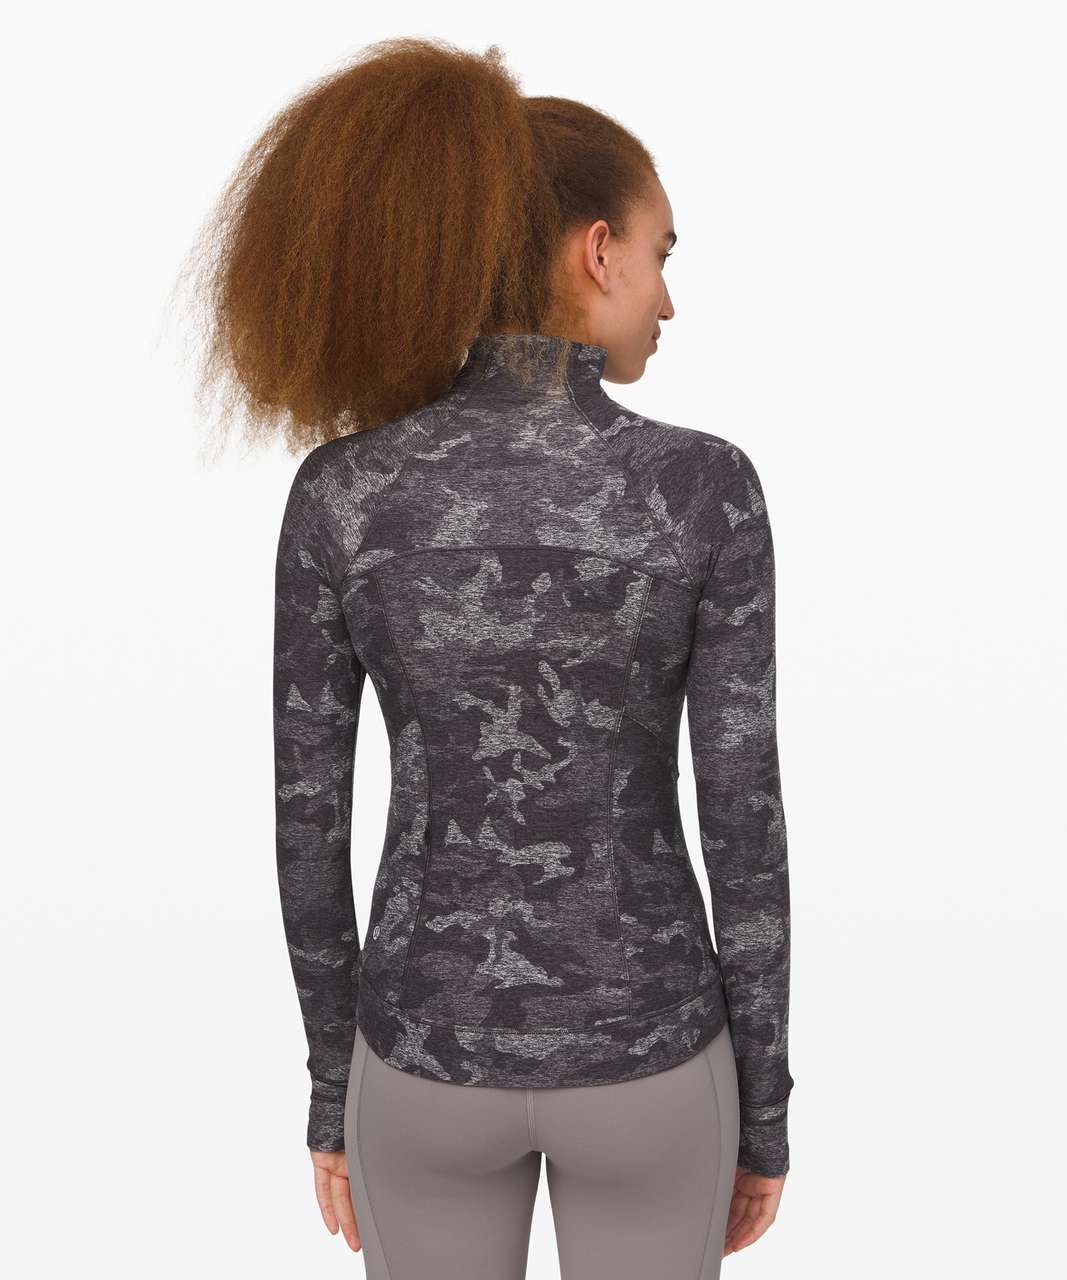 Lululemon Outrun the Elements 1/2 Zip - Incognito Camo HTR Black